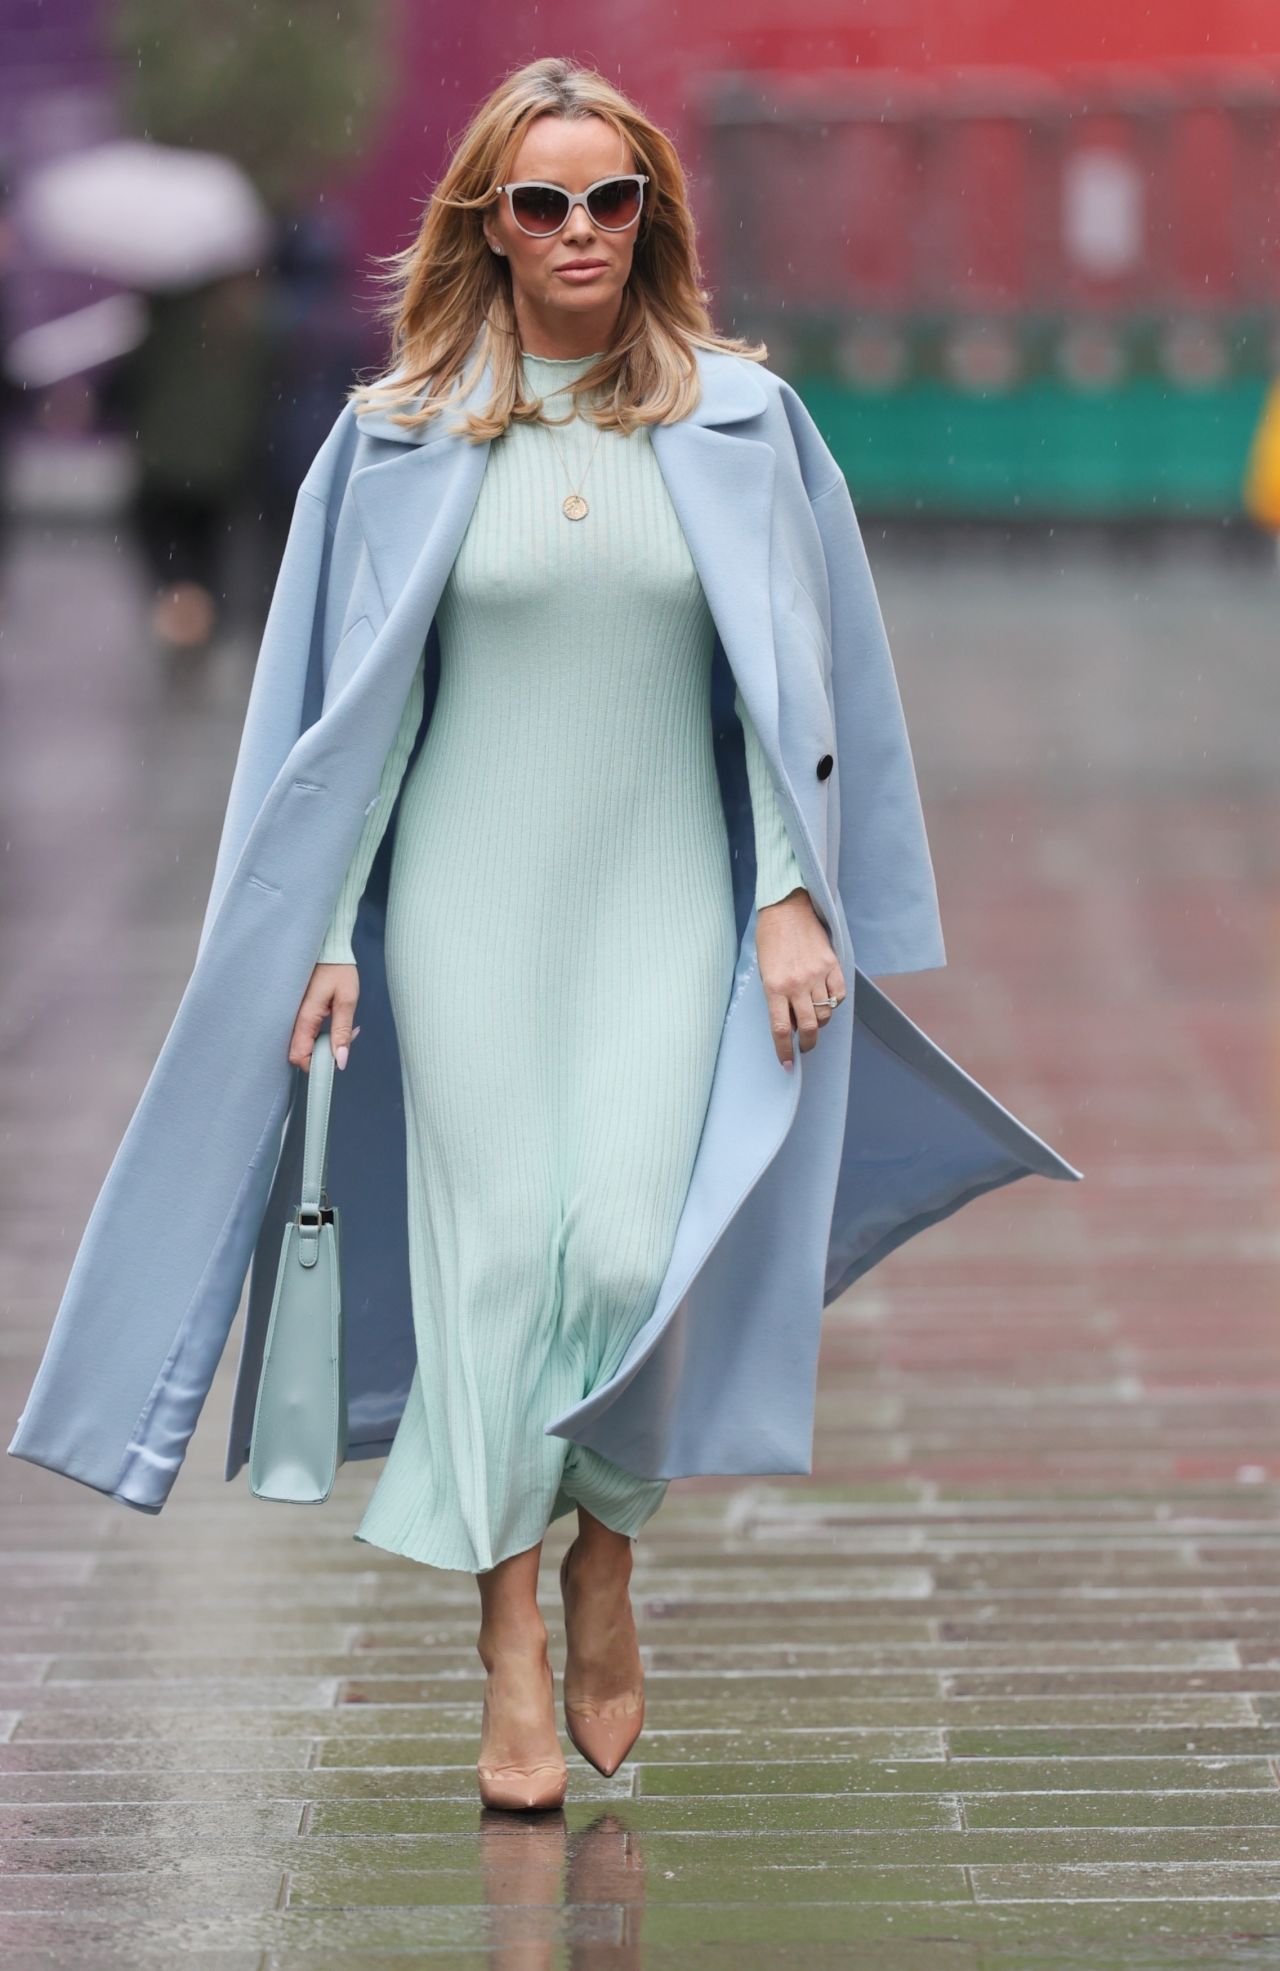 Amanda Holden in a Fitted Mint Green Dress and Pale Blue Coat 05/13 ...